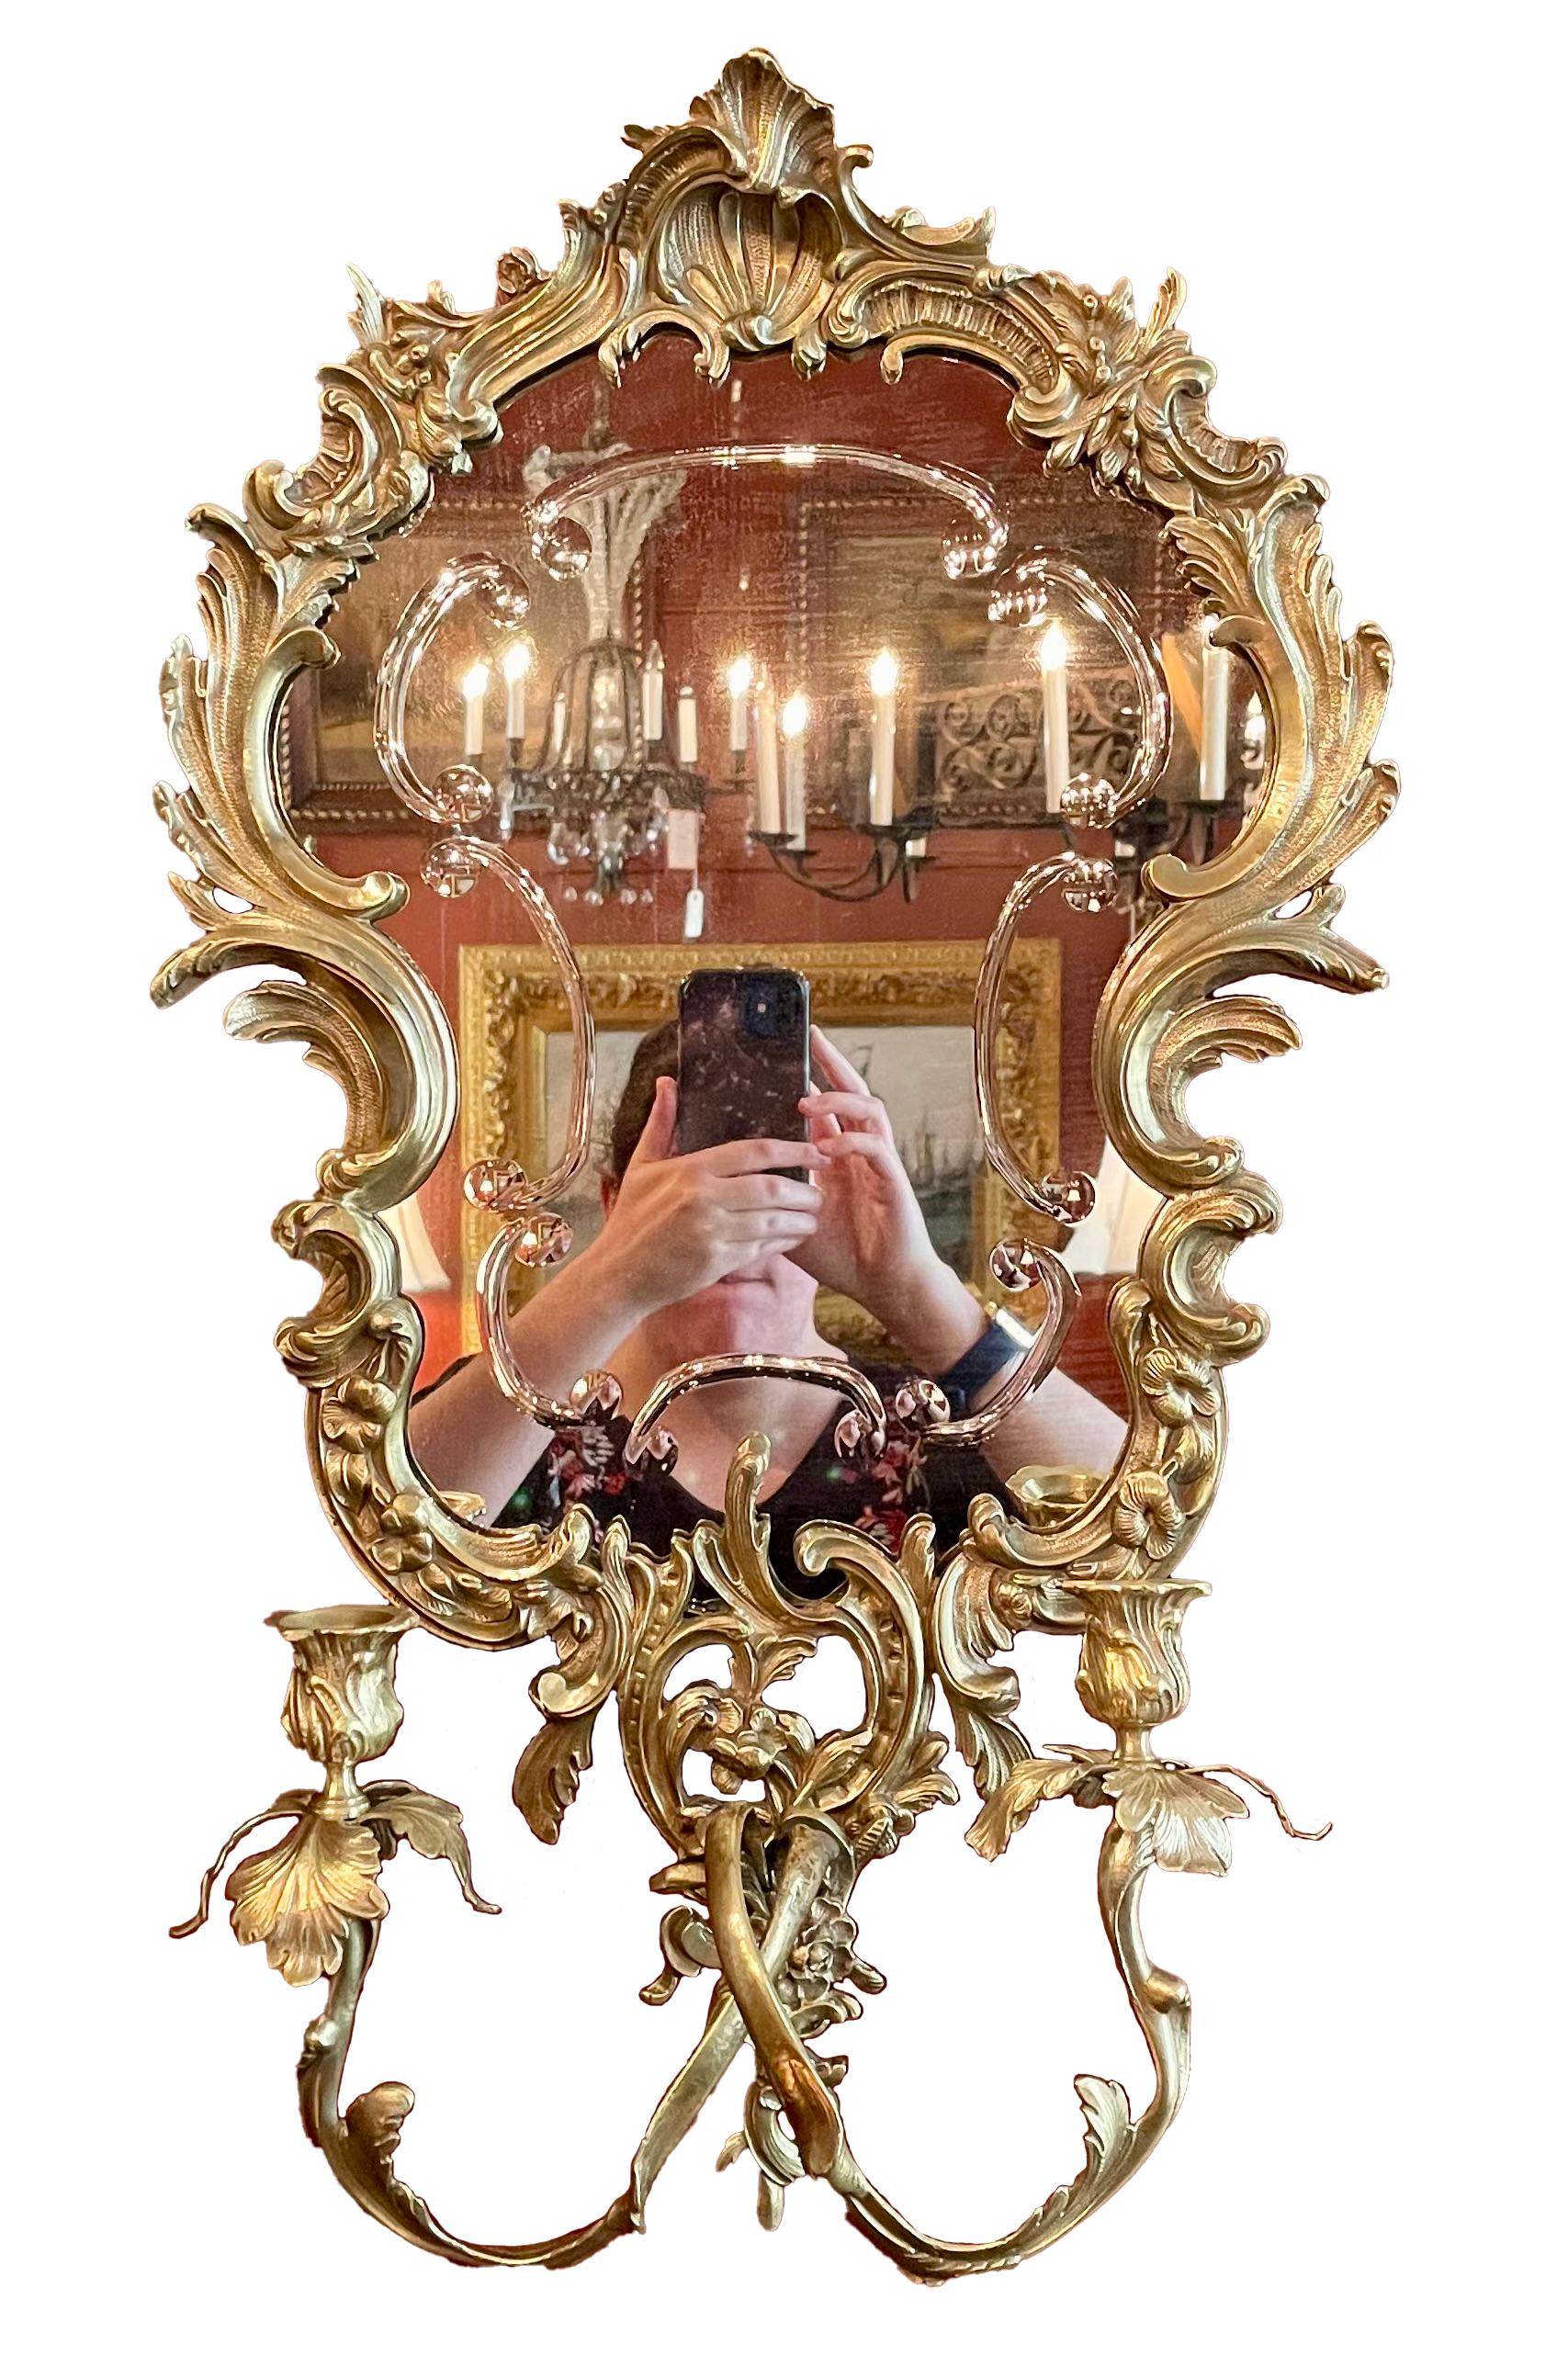 Pair of exceptional antique gold bronze and mirror sconces, circa 1890.
